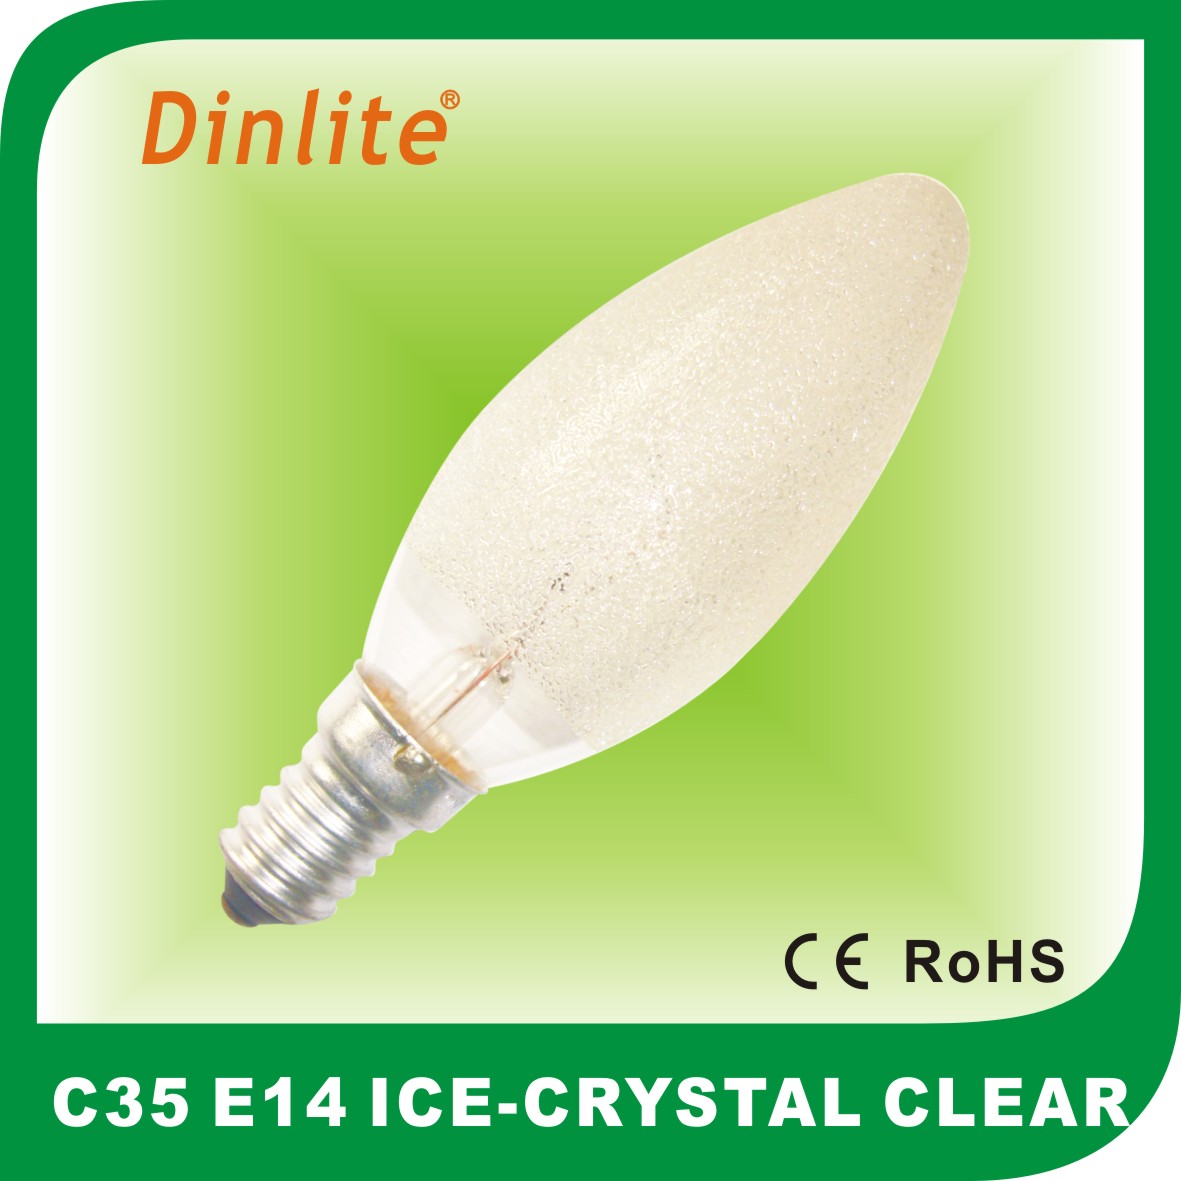 C35 Ice-Crystal Clear Candle Bulbs Decorative Lamps E14